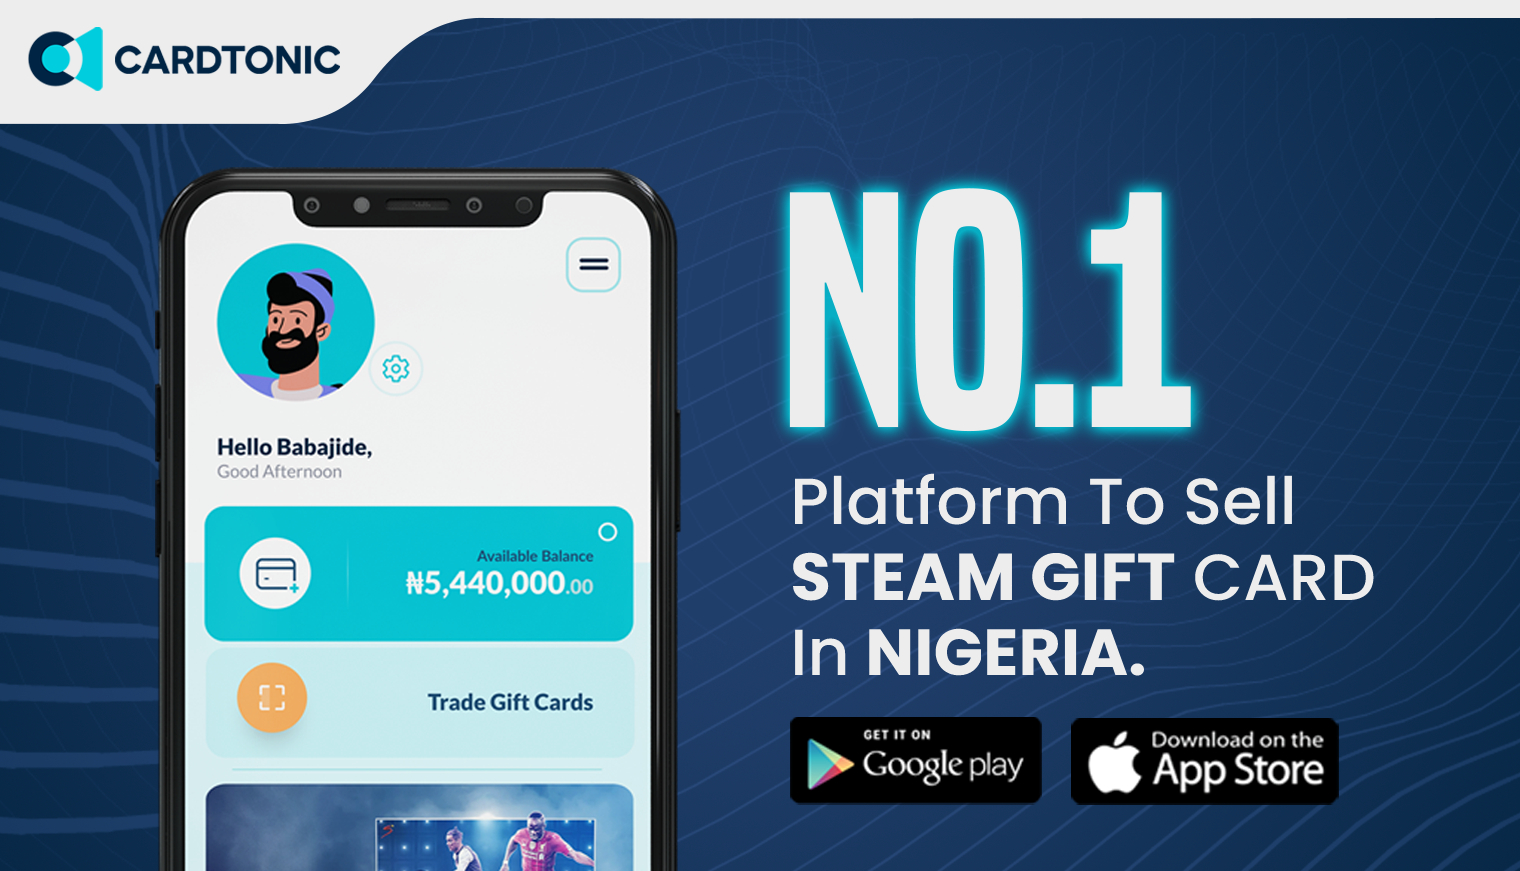 SELL STEAM GIFT CARD IN NIGERIA